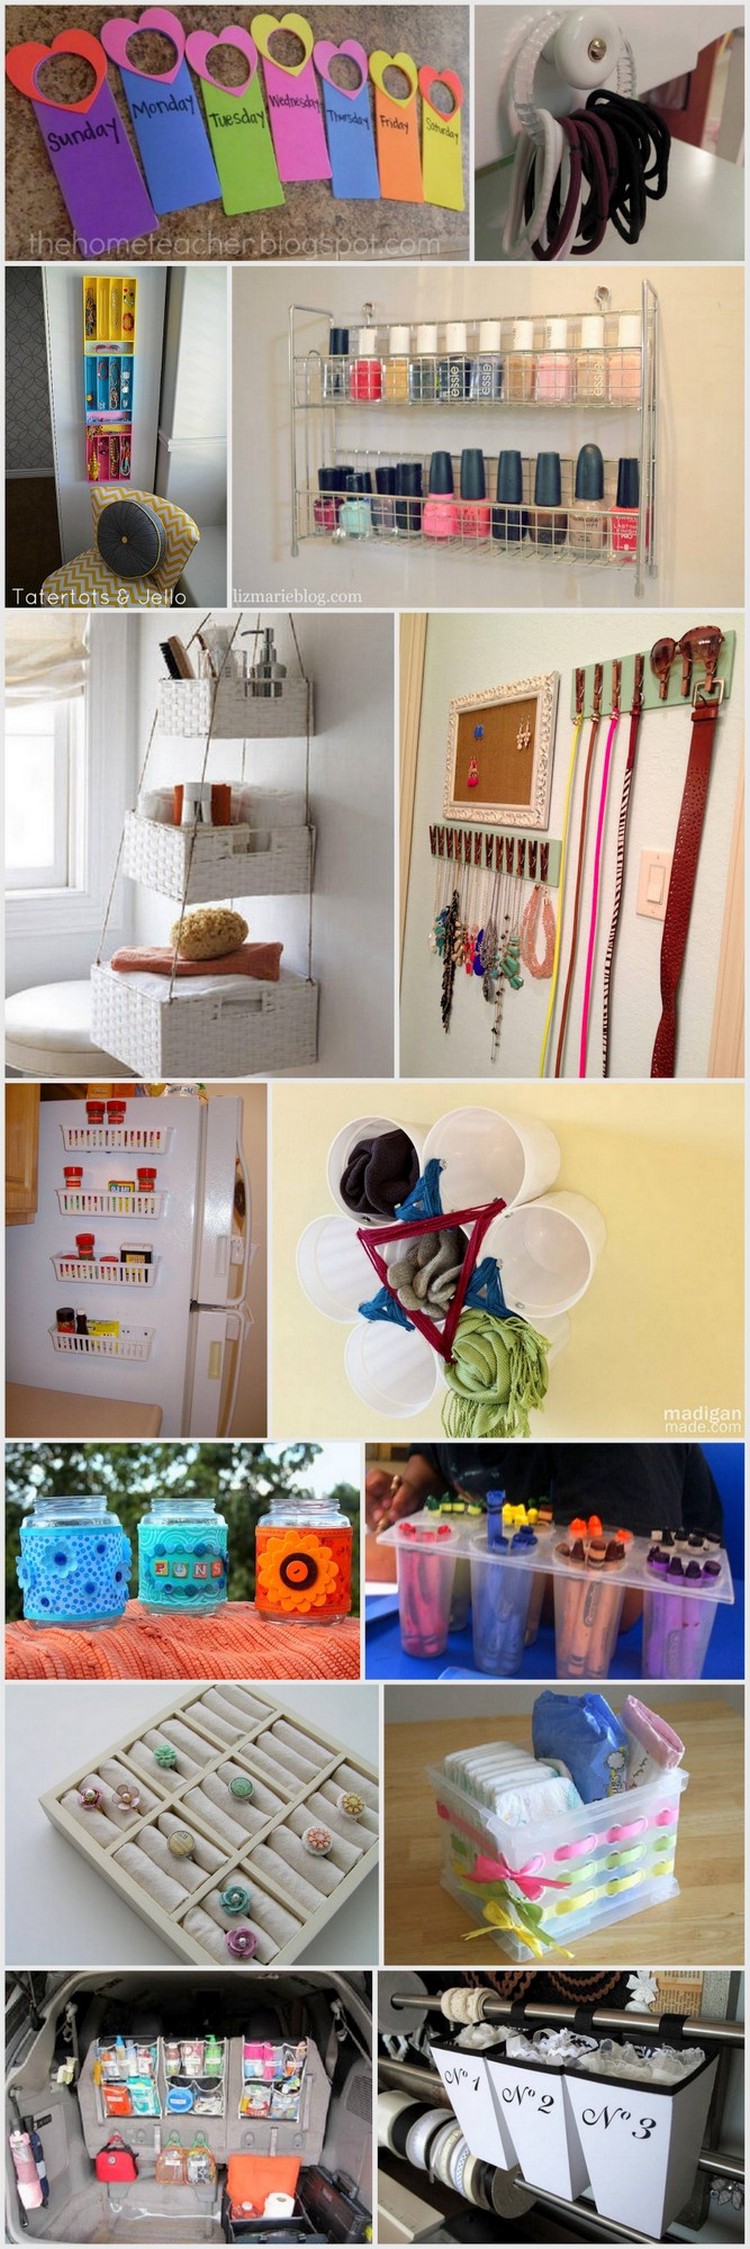 Creative DIY Projects in Organizing Your Home Using Dollar Store Items